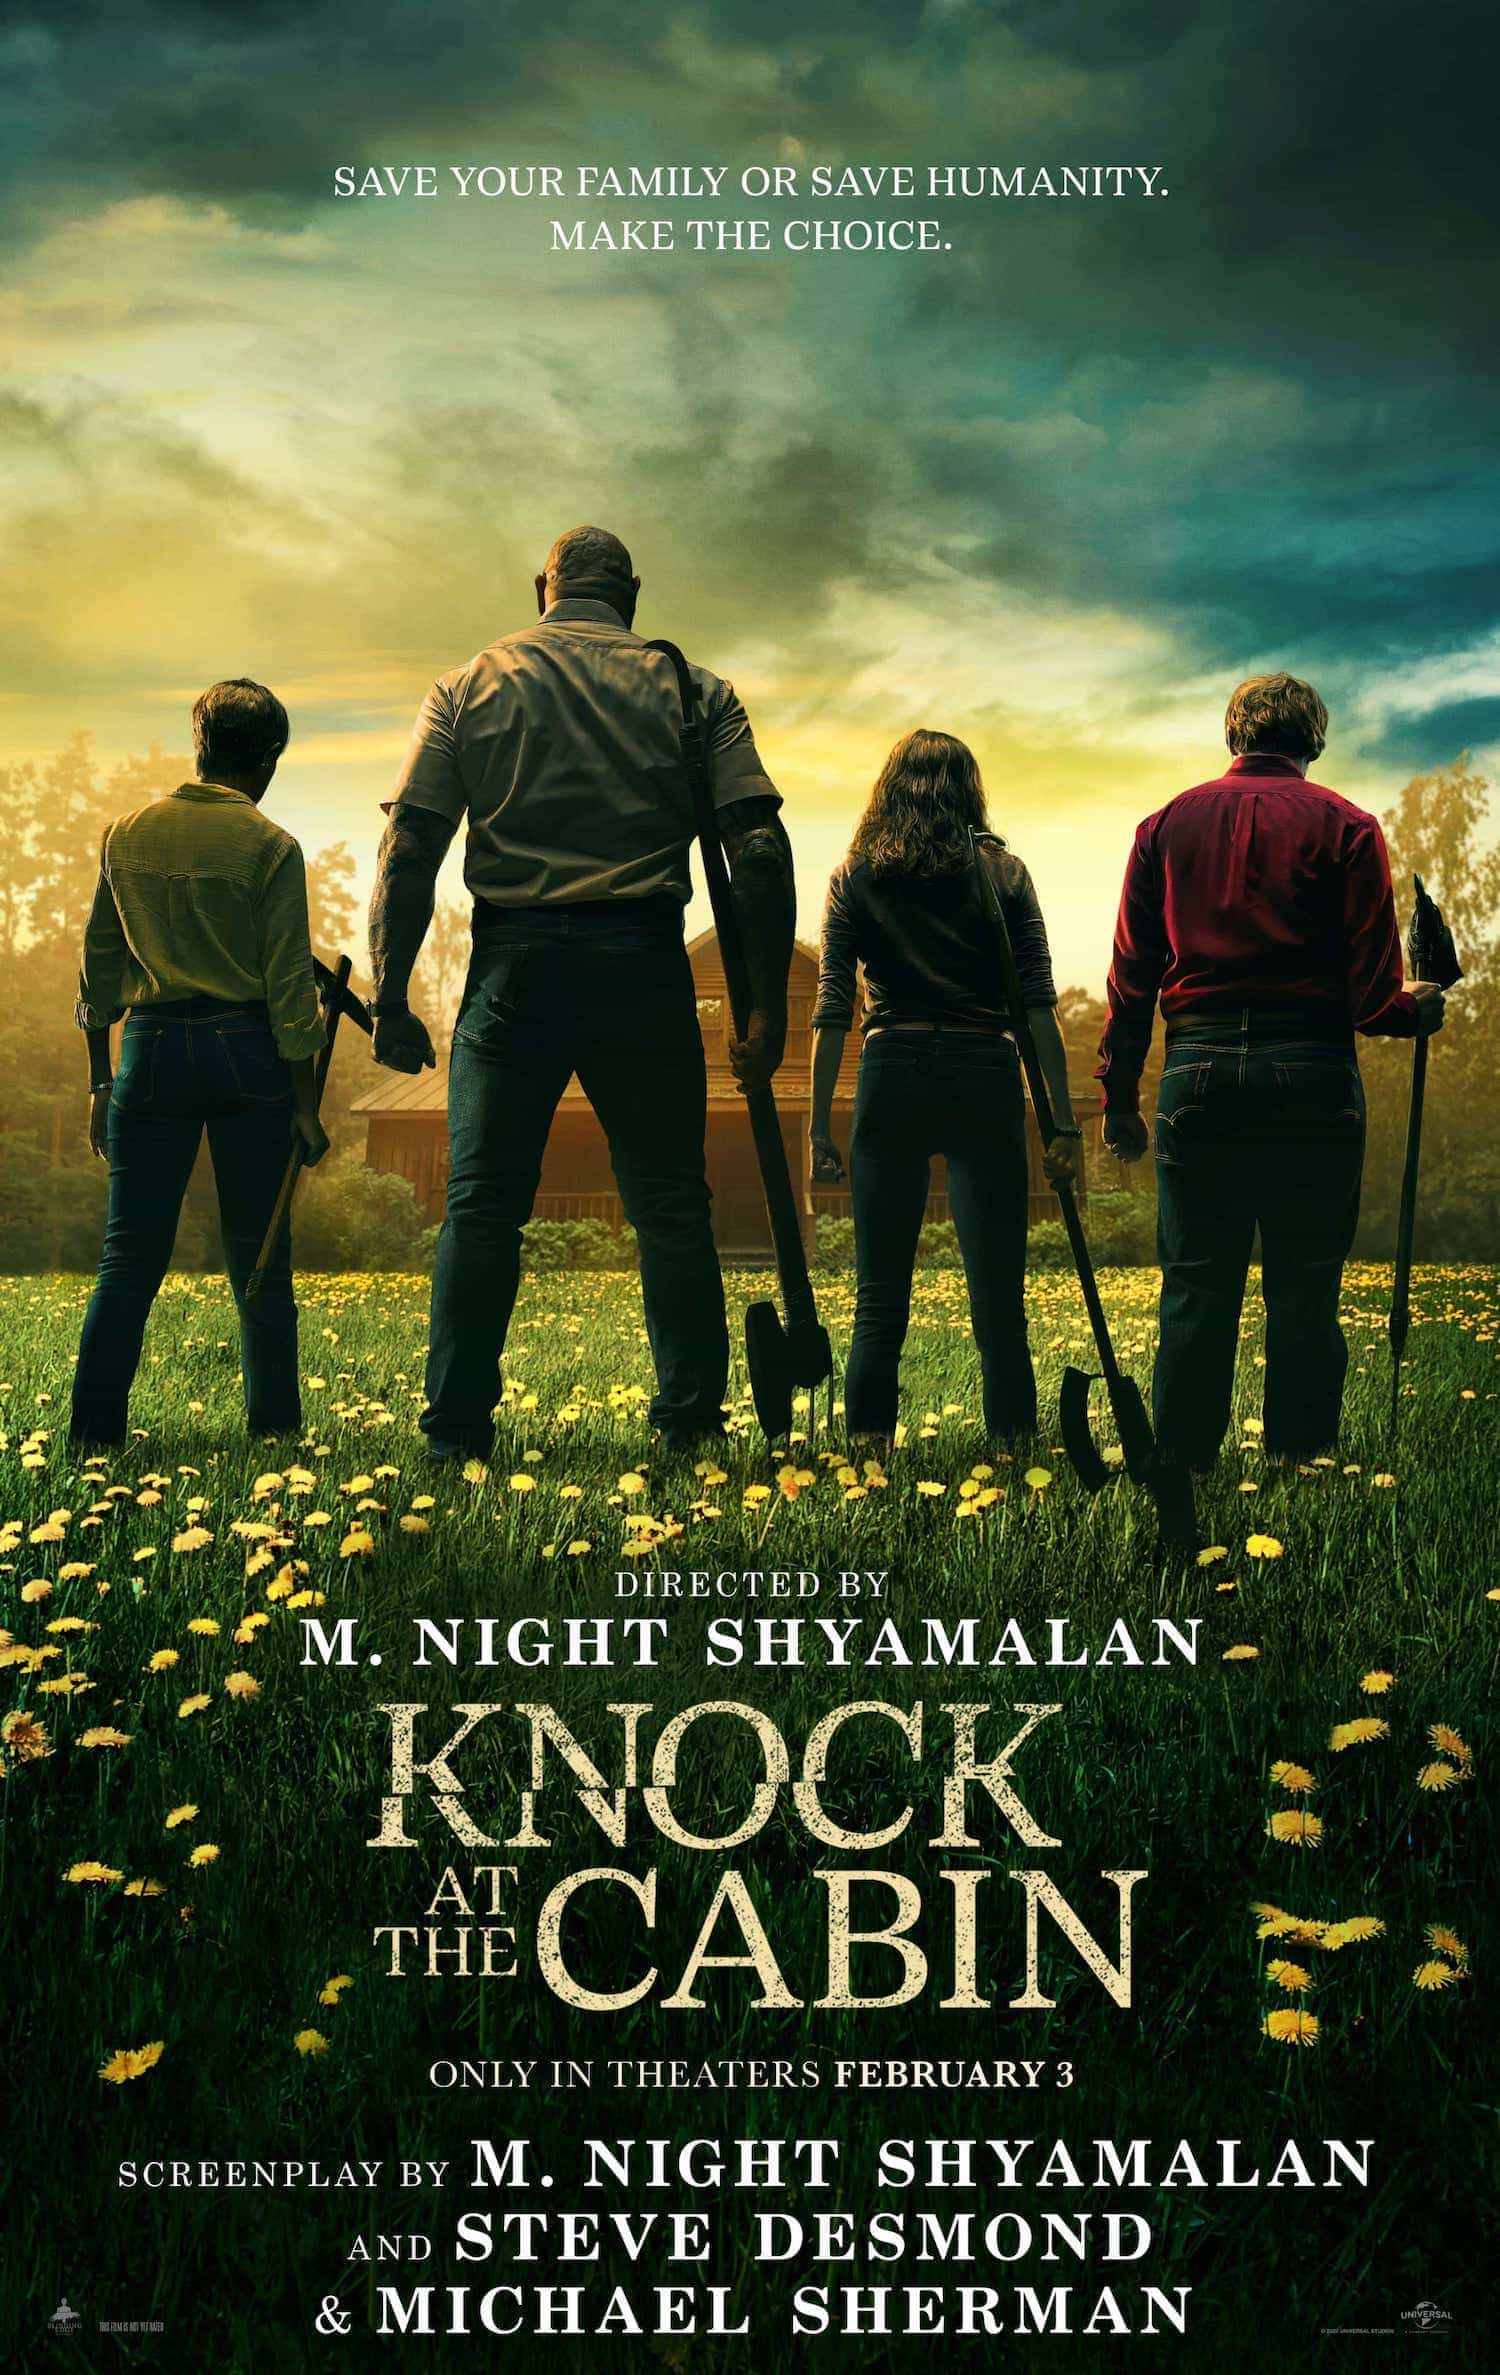 New poster released for Knock At the Cabin starring Dave Bautista - movie UK release date 17th February 2023 #knockatthecabin